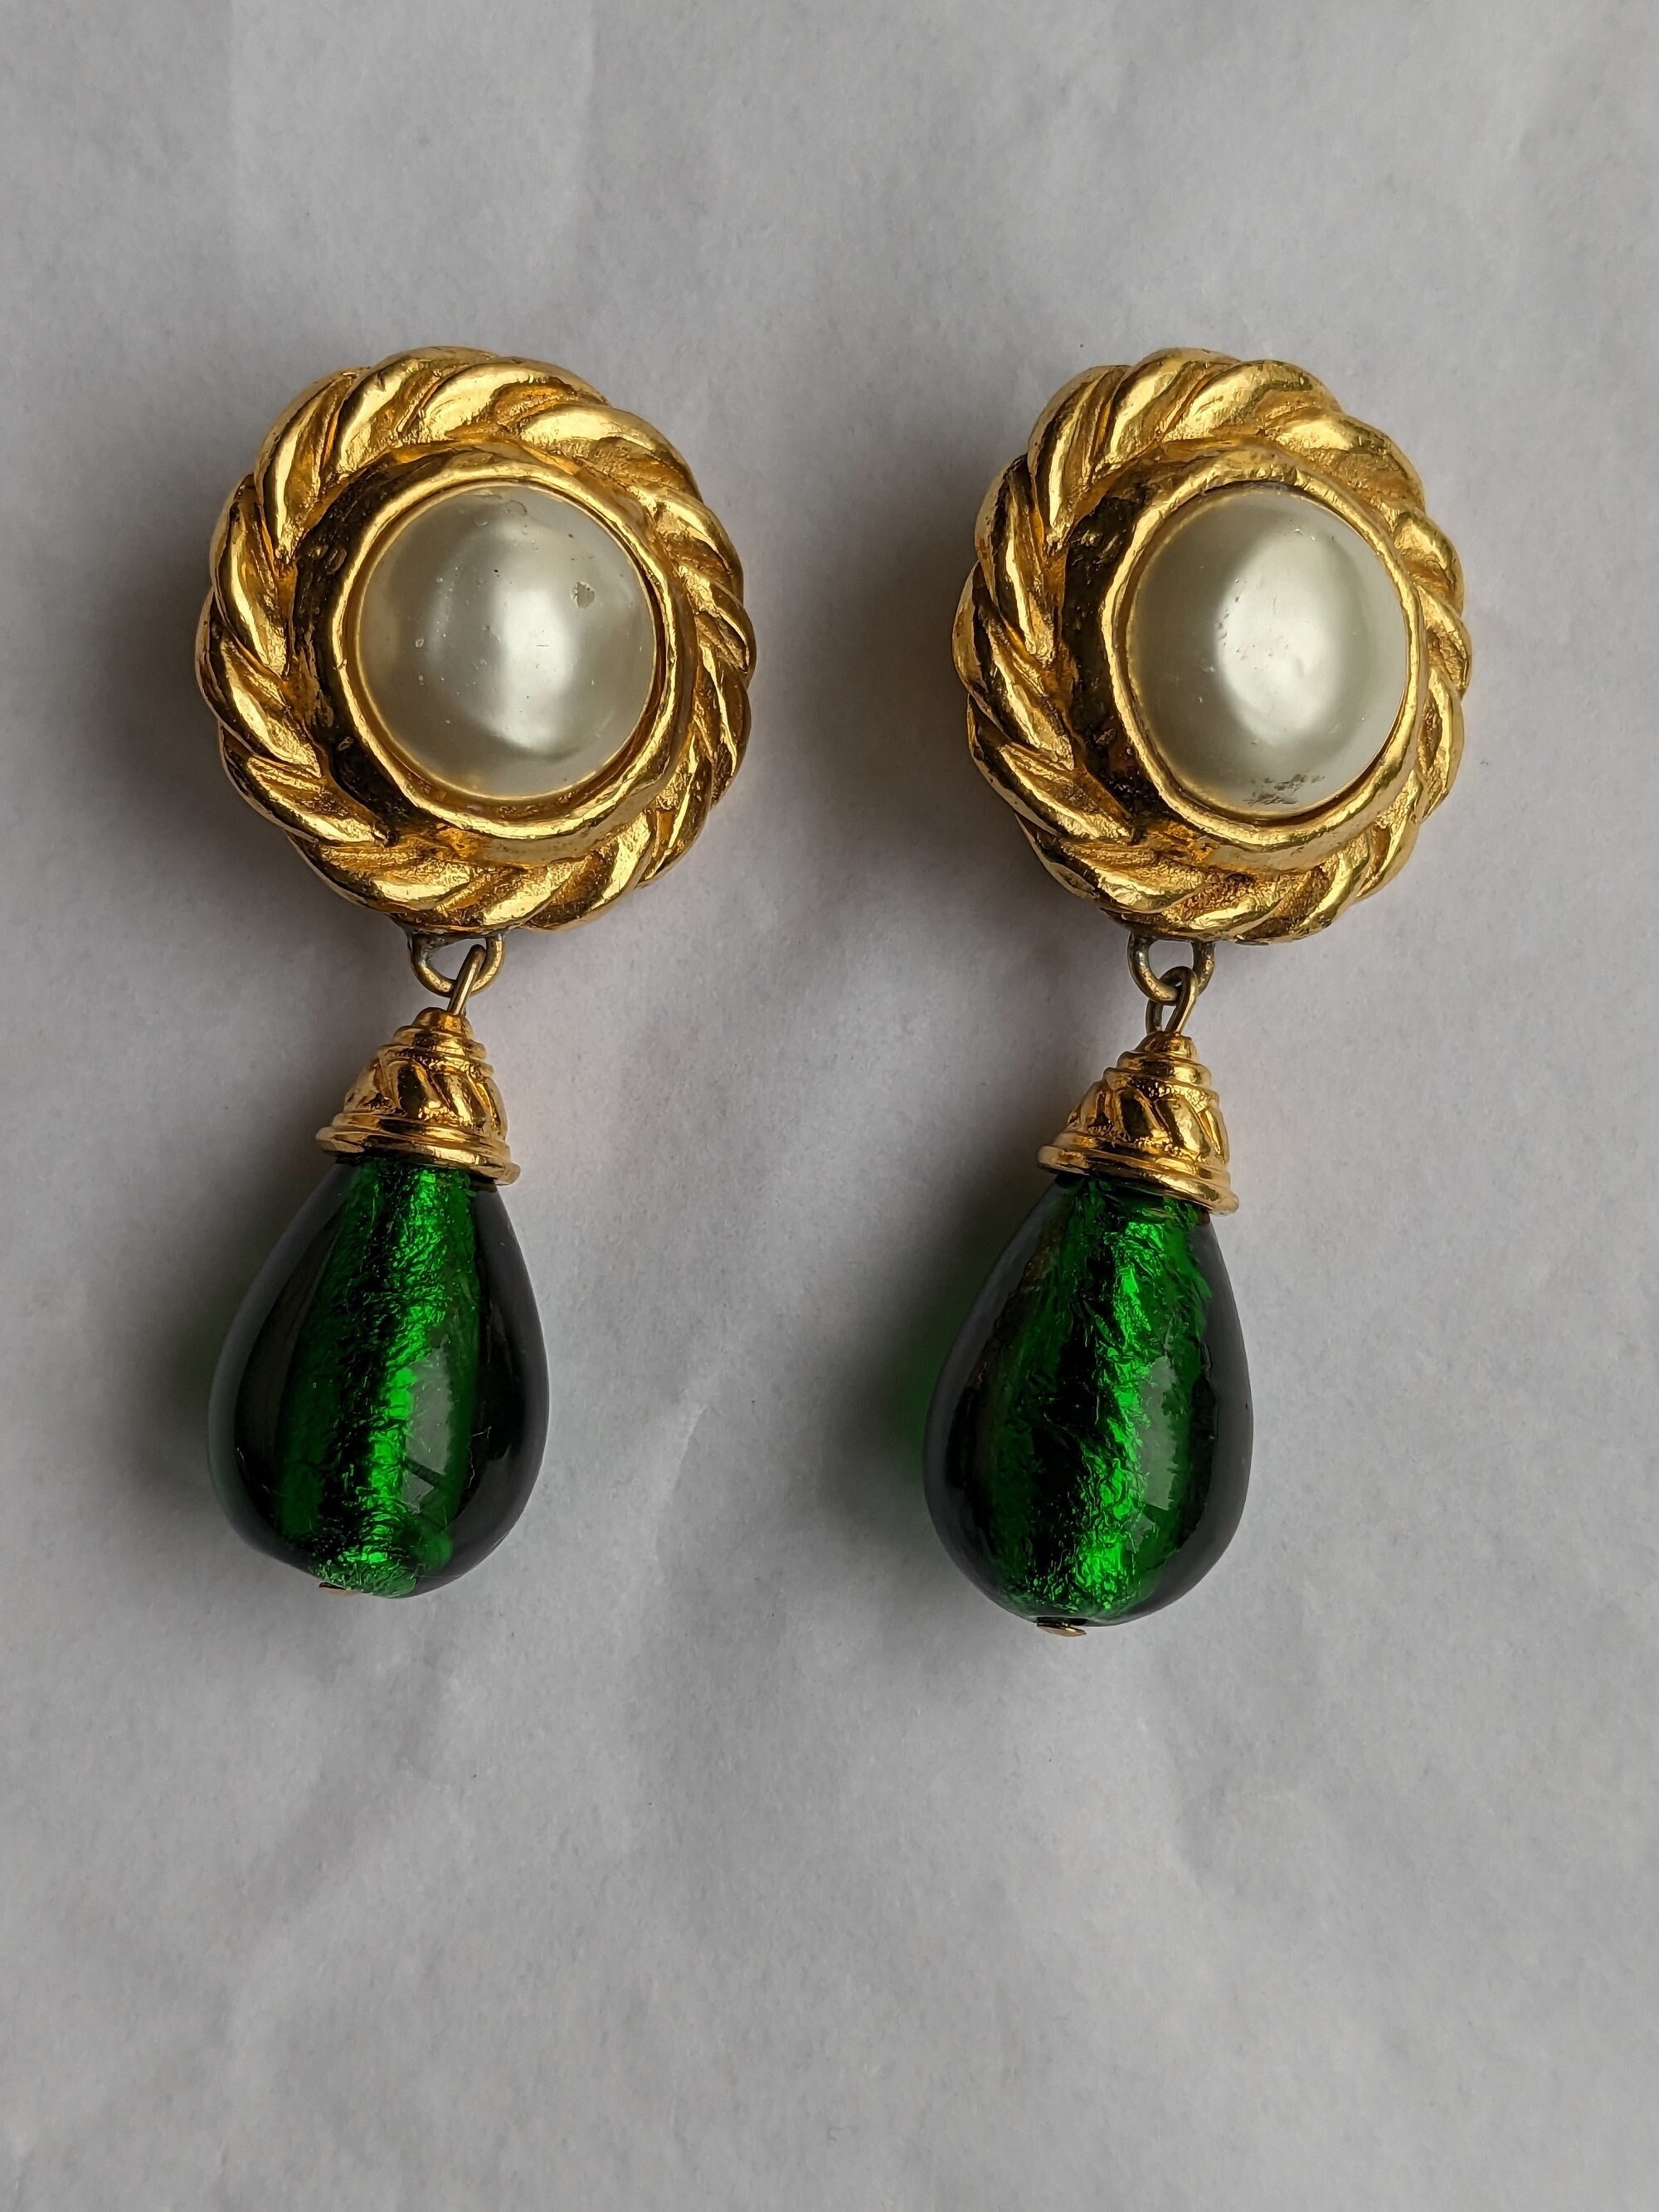 Vintage Golden and Center Pearl Drop-earrings Emerald Glass 